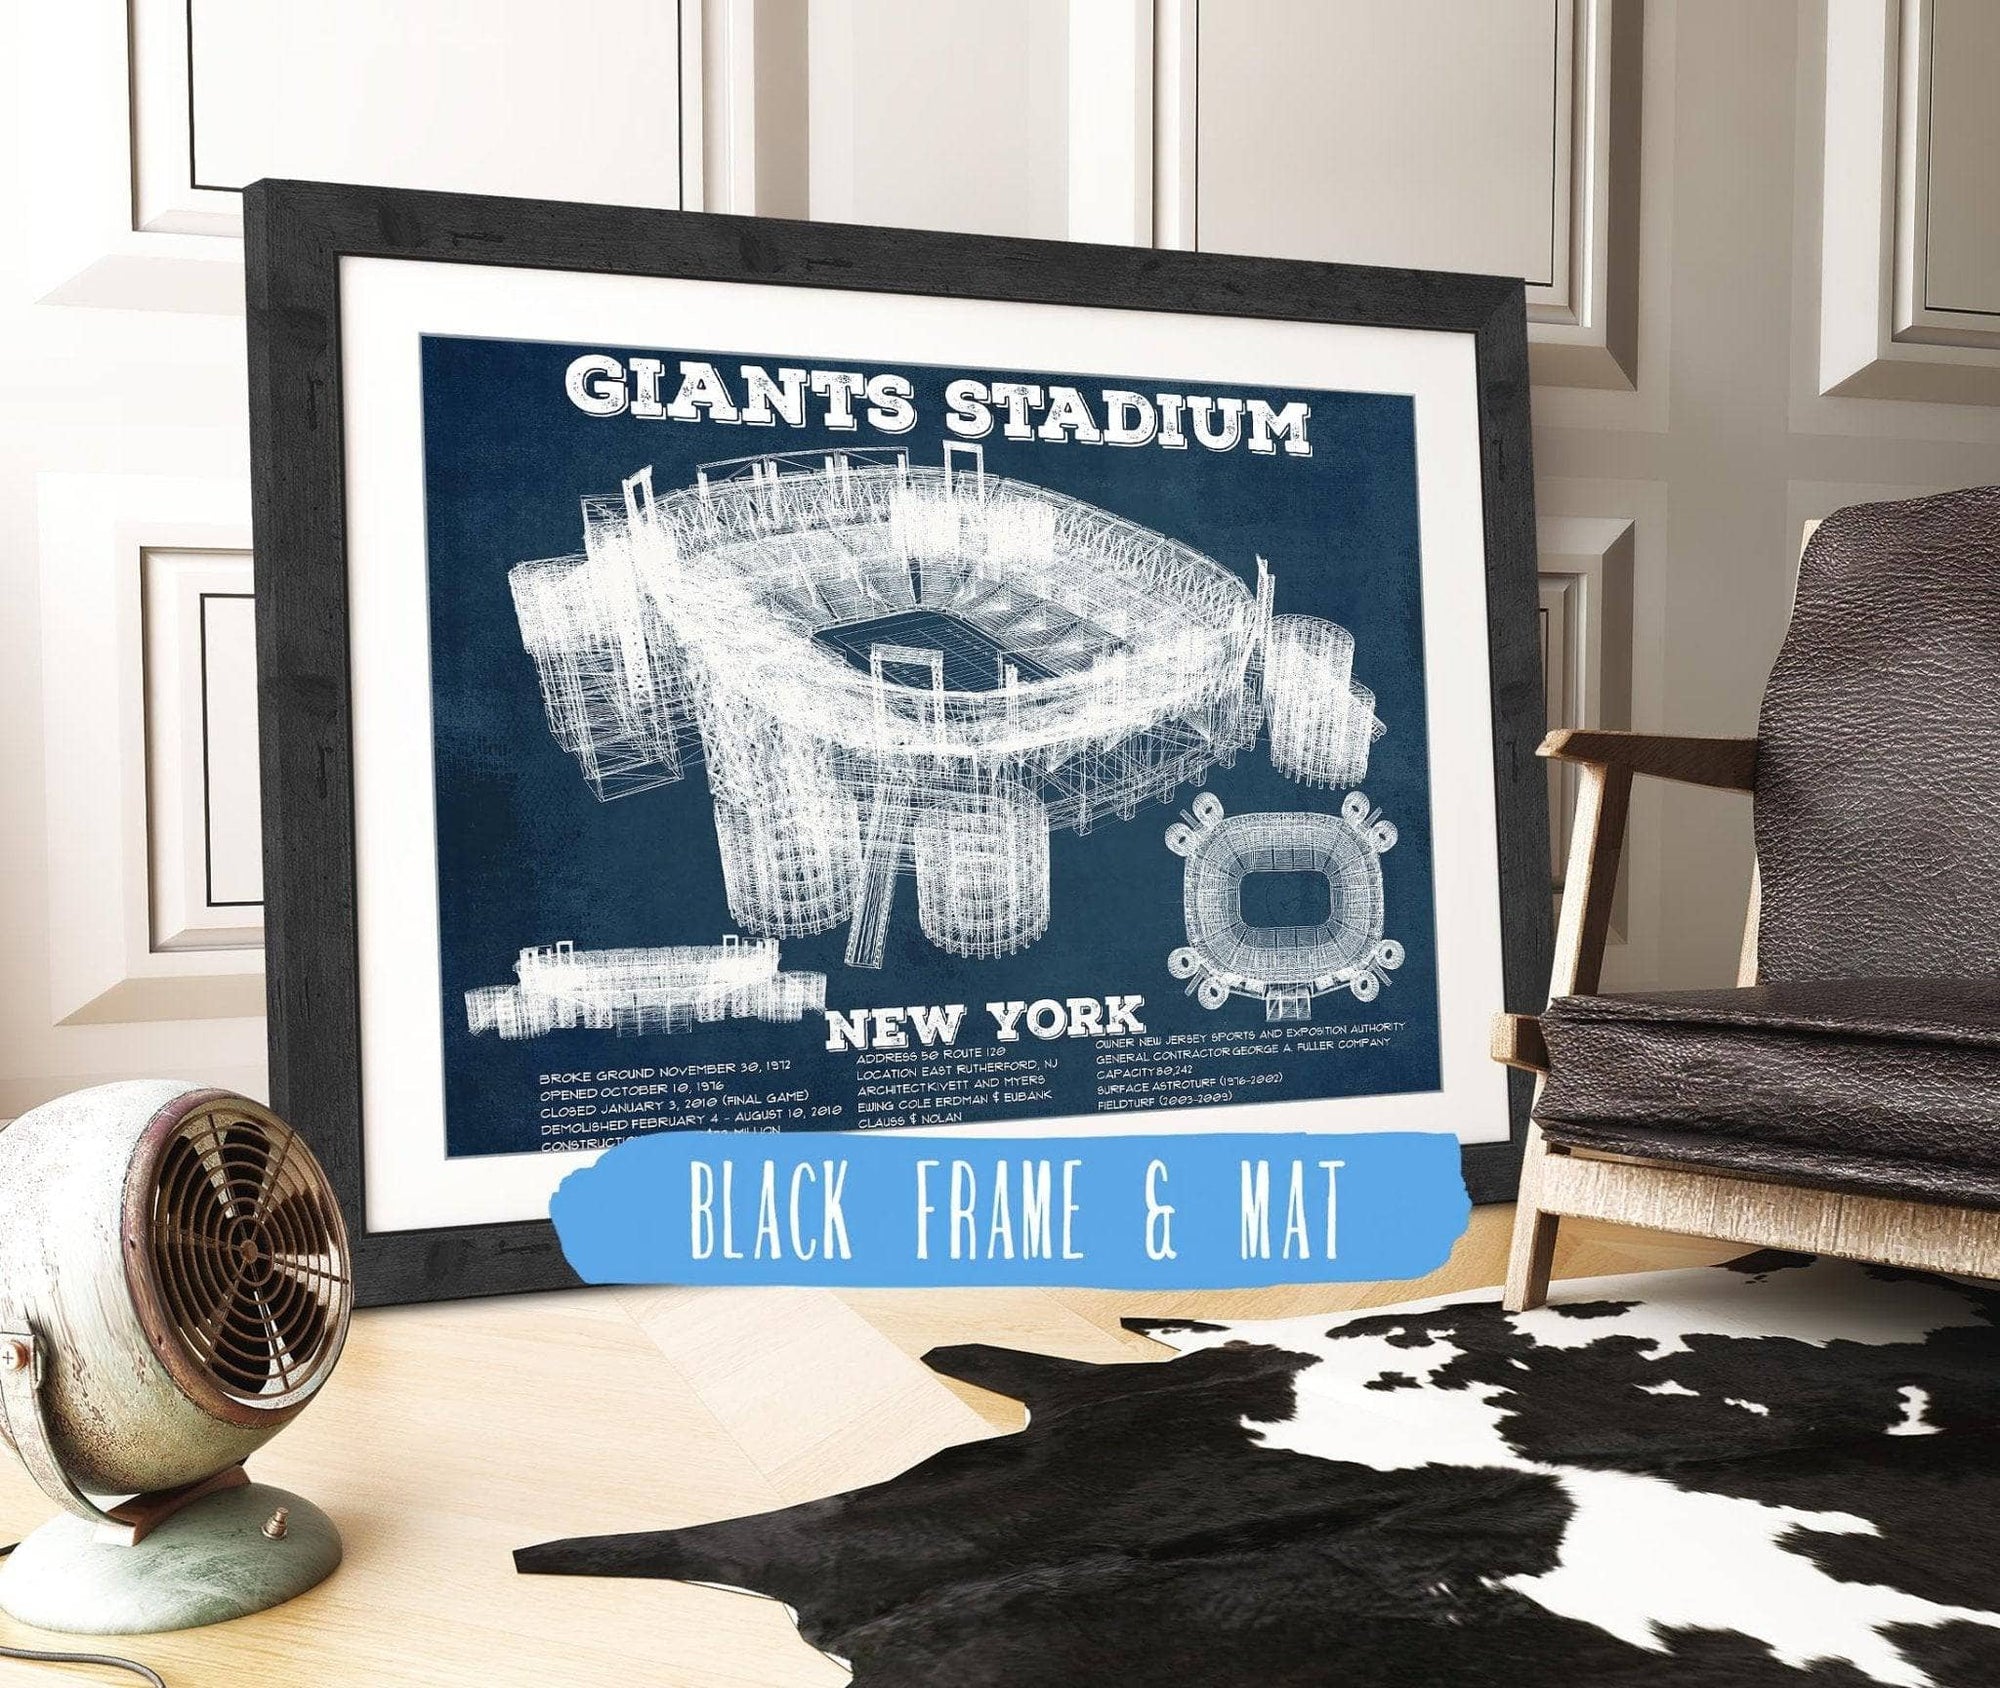 Cutler West Pro Football Collection 14" x 11" / Black Frame & Mat Giants Stadium - The Meadowlands New York Vintage Print 731428206-TOP